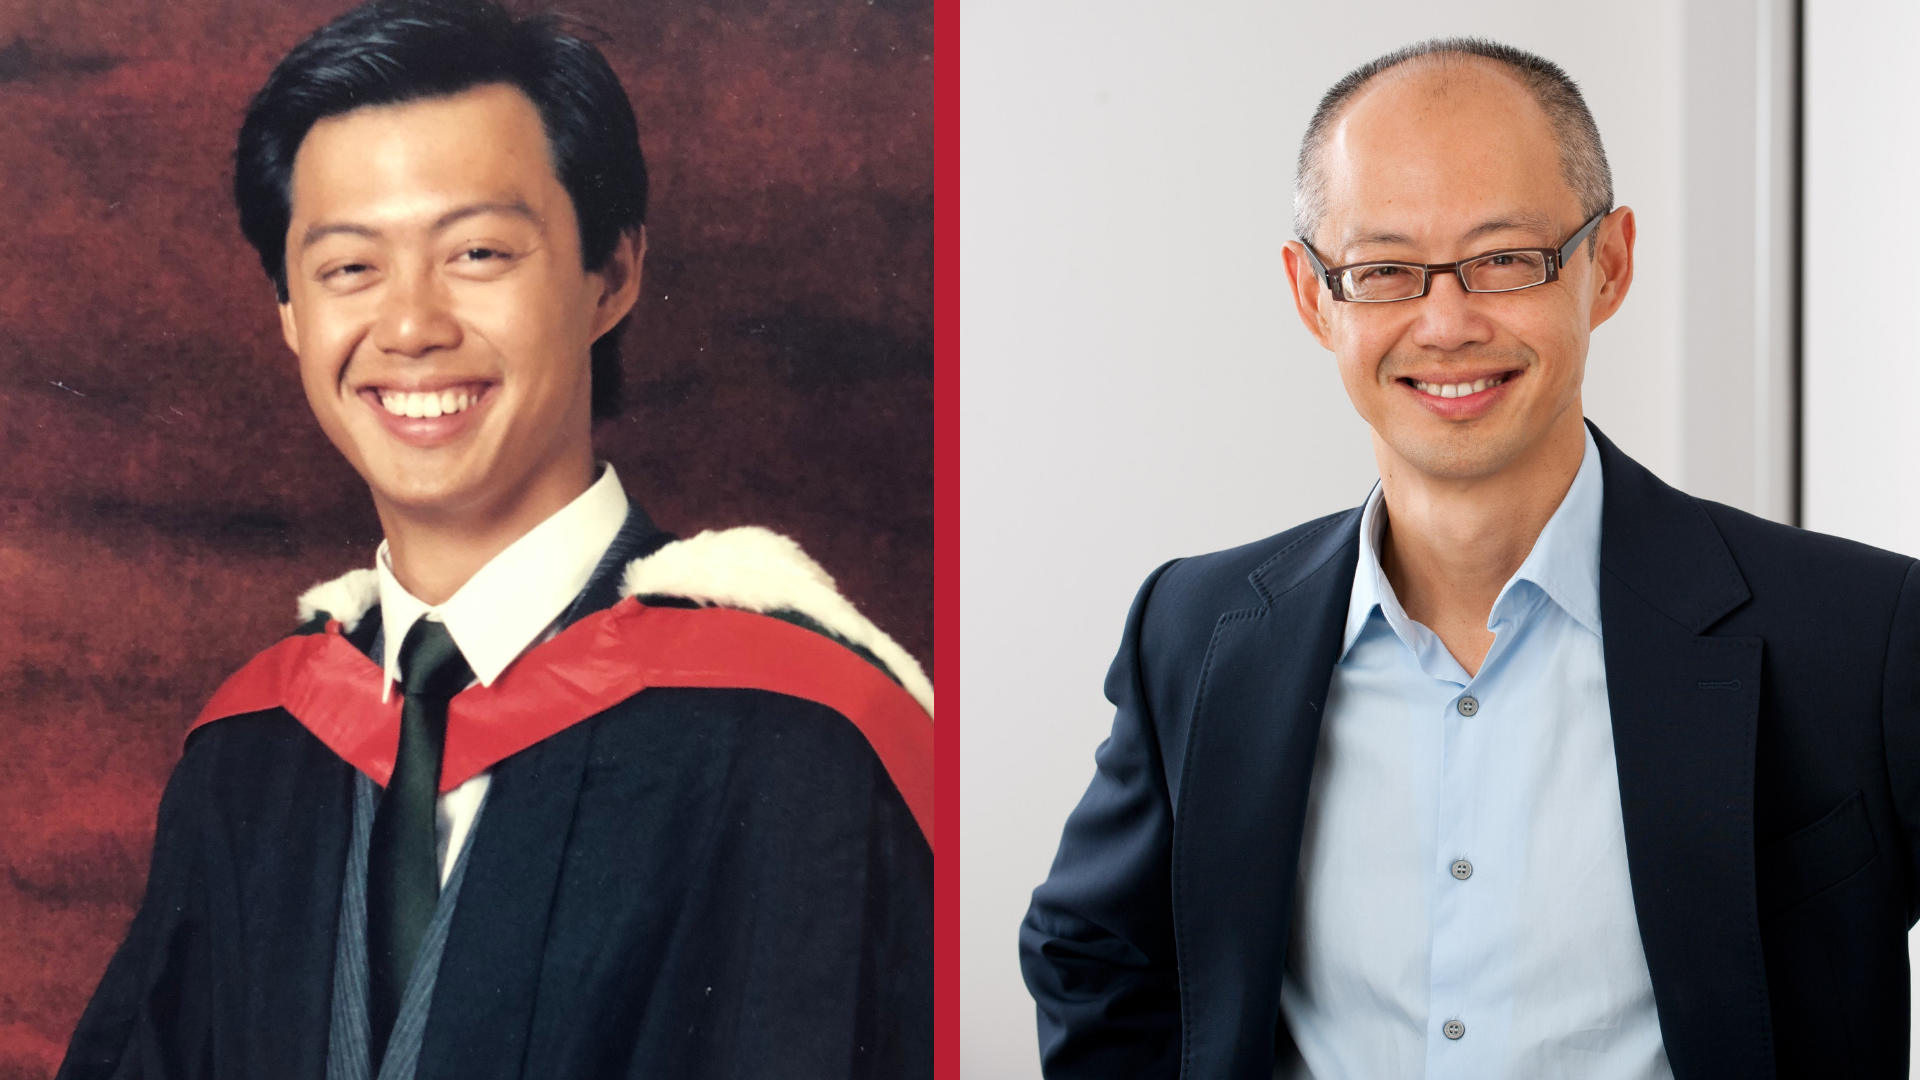 Then and now - BSH President Cheng-Hock Toh